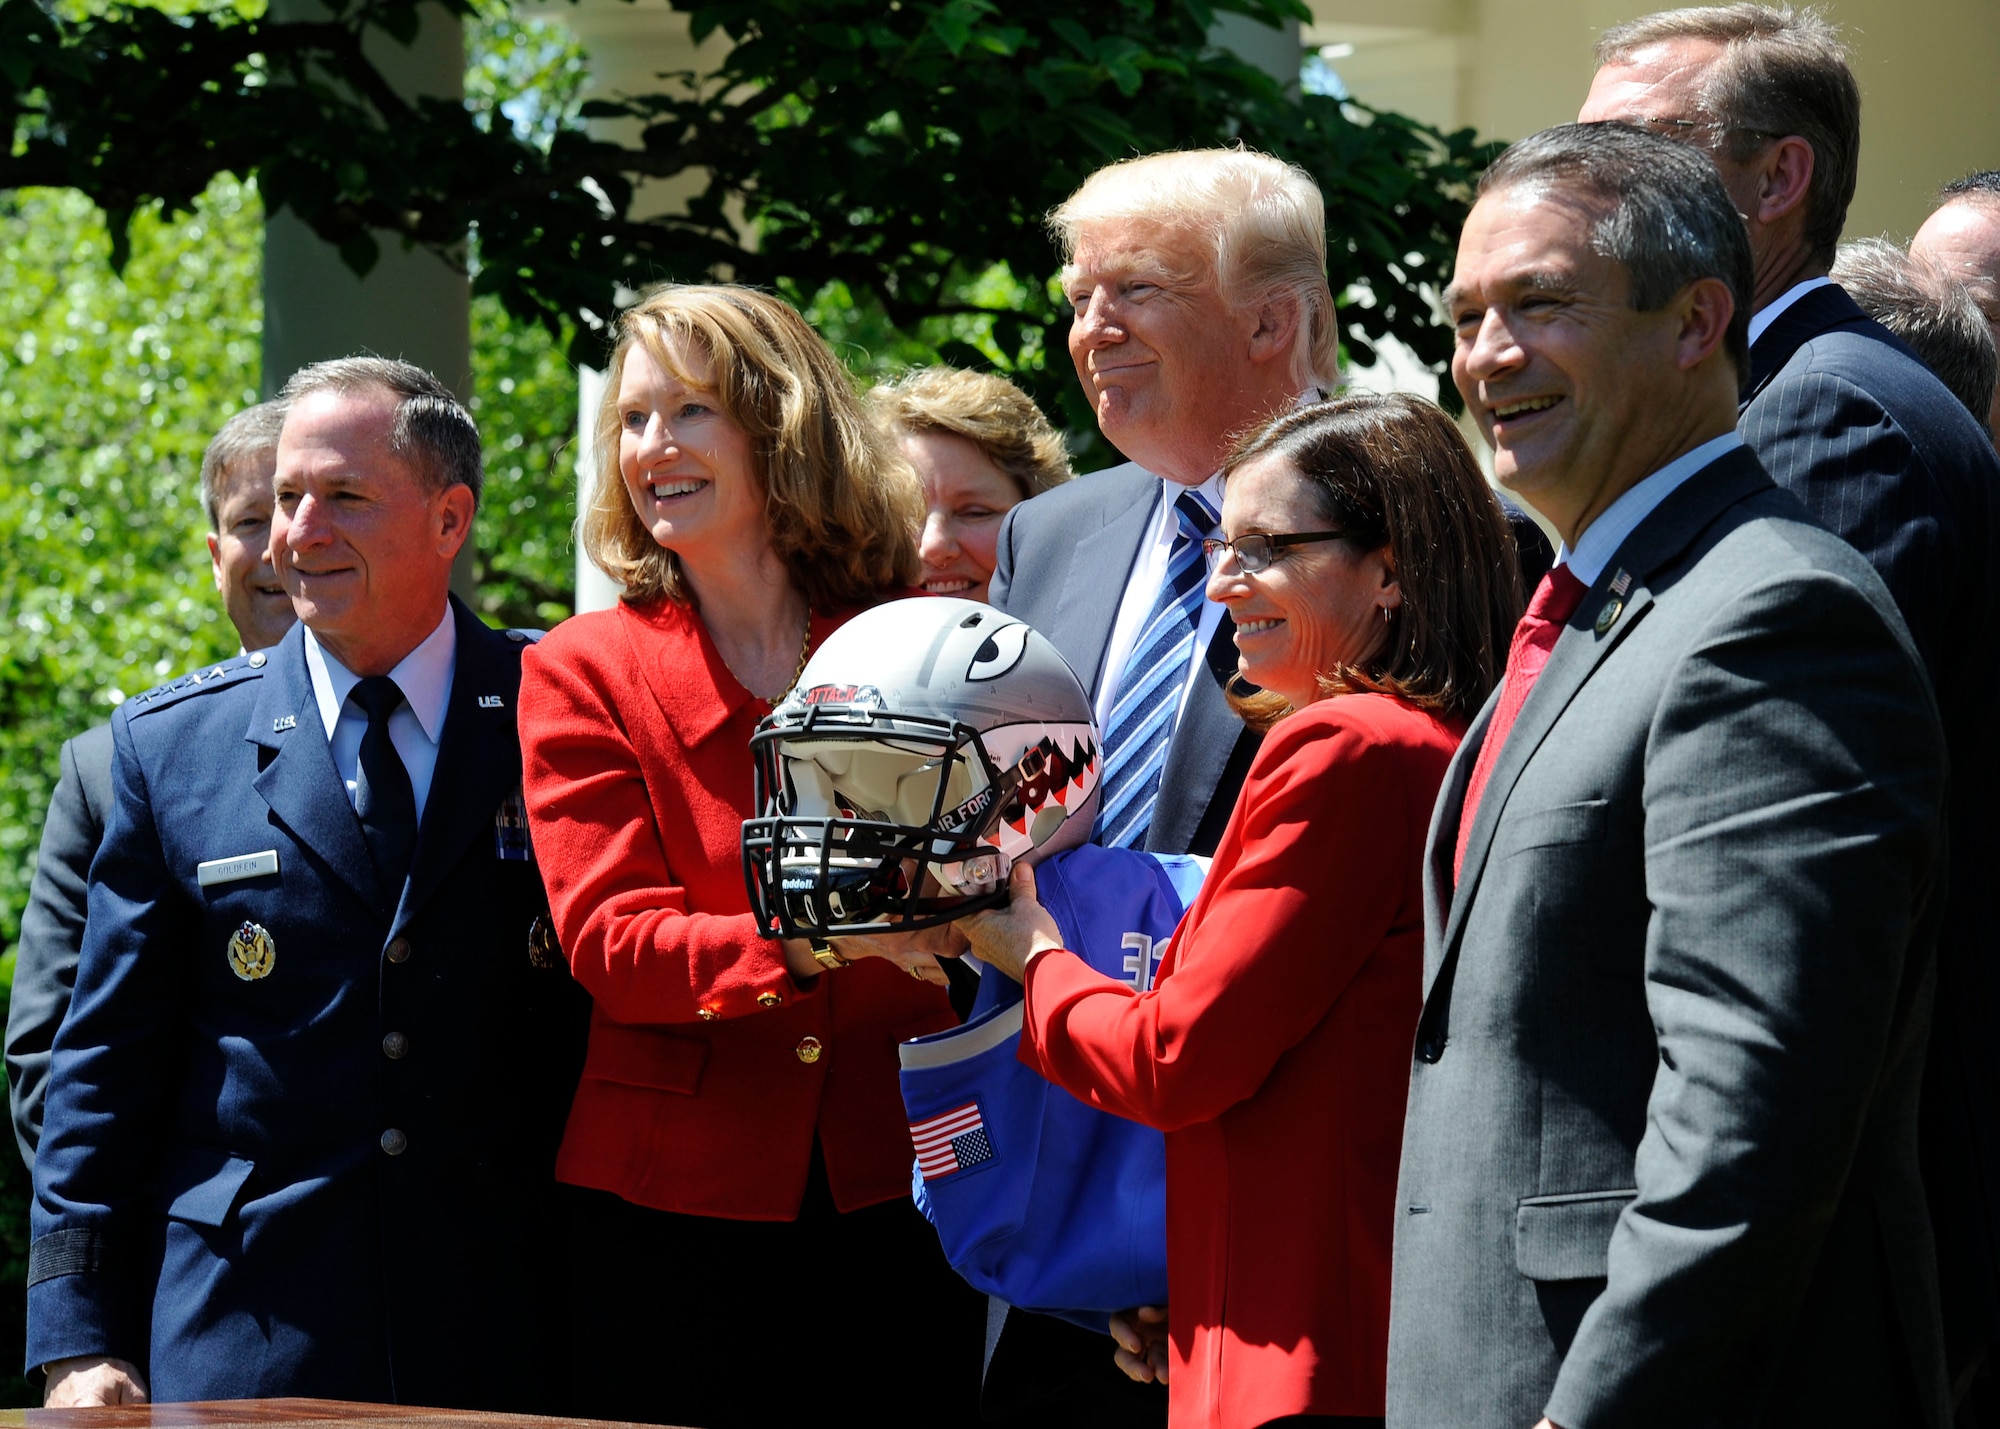 Air Force Chief of Staff Gen. David L. Goldfein, (left), and Acting Secretary of the Air Force Lisa S. Disbrow pose for a photo with President Donald Trump at the White House, May 2, 2017. Trump congratulated the U.S. Air Force Academy football team with the Commander -in -Chief's Trophy. (U.S. Air Force photo/Staff Sgt. Jannelle McRae)